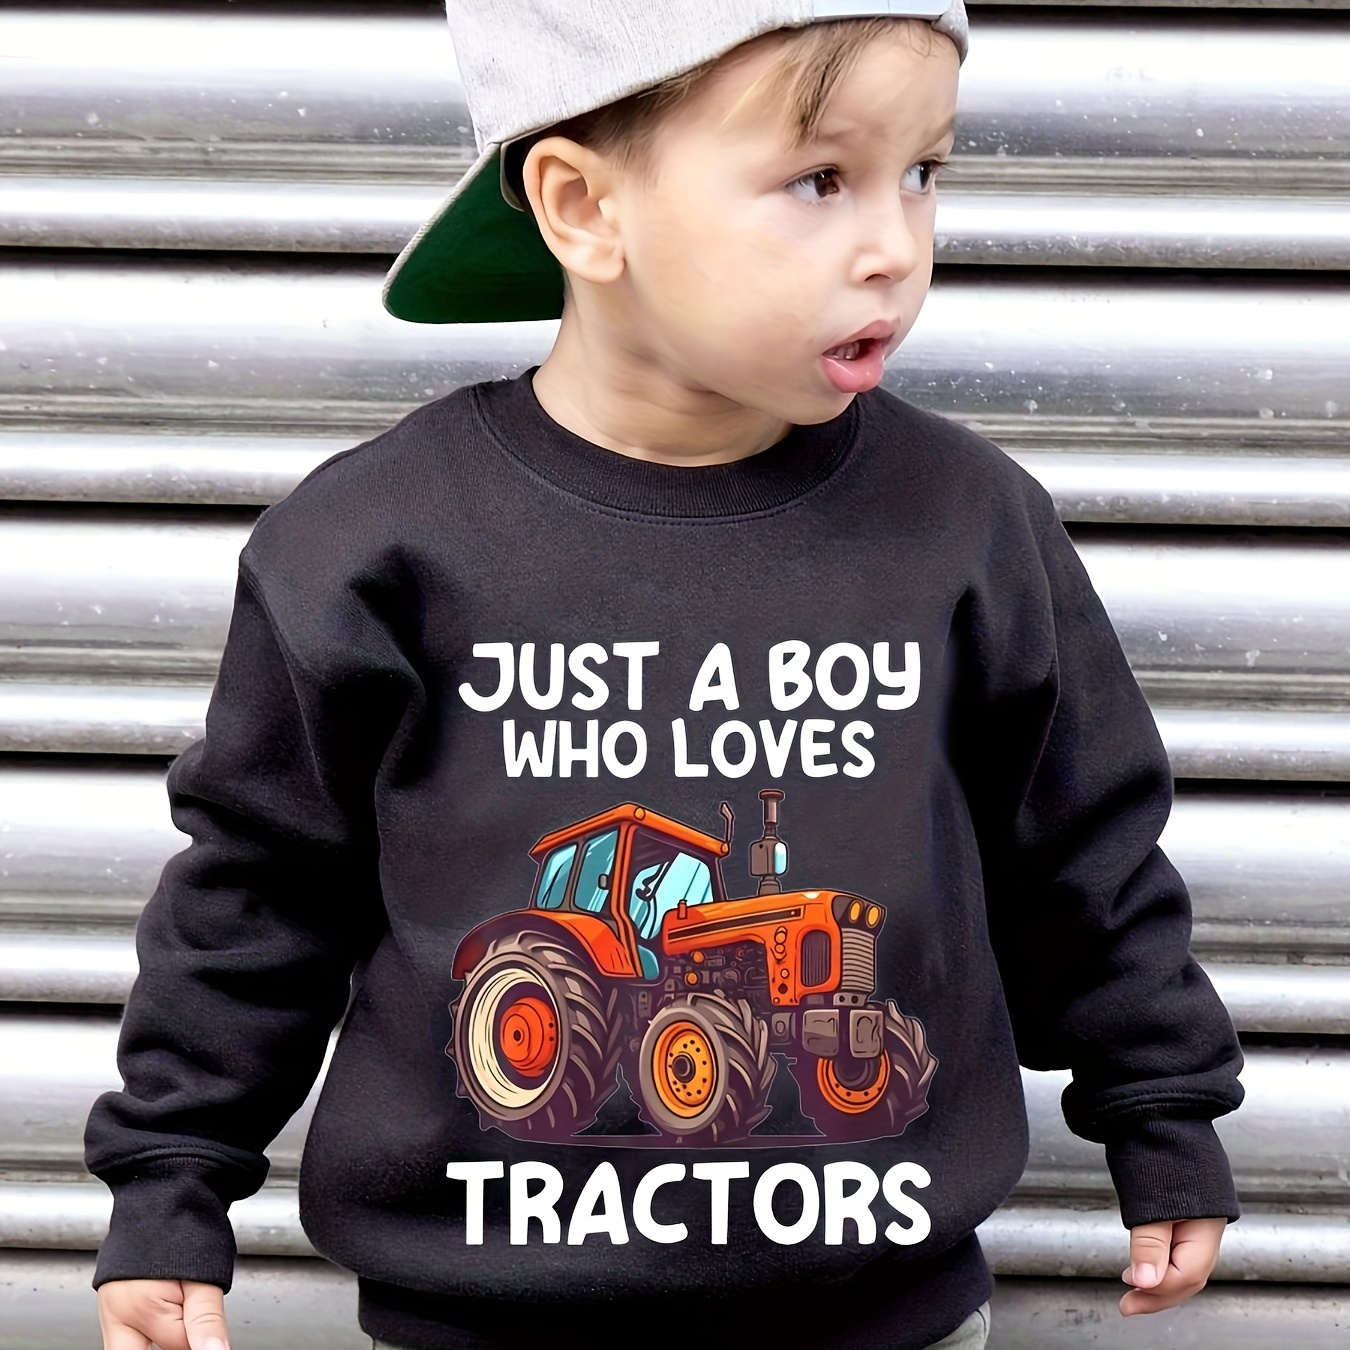 

Just A Boy Who Loves Tractors Letter Graphic Print Boys Warm Fleece Sweatshirt Thick And Cozy Top For Spring Fall Winter Season